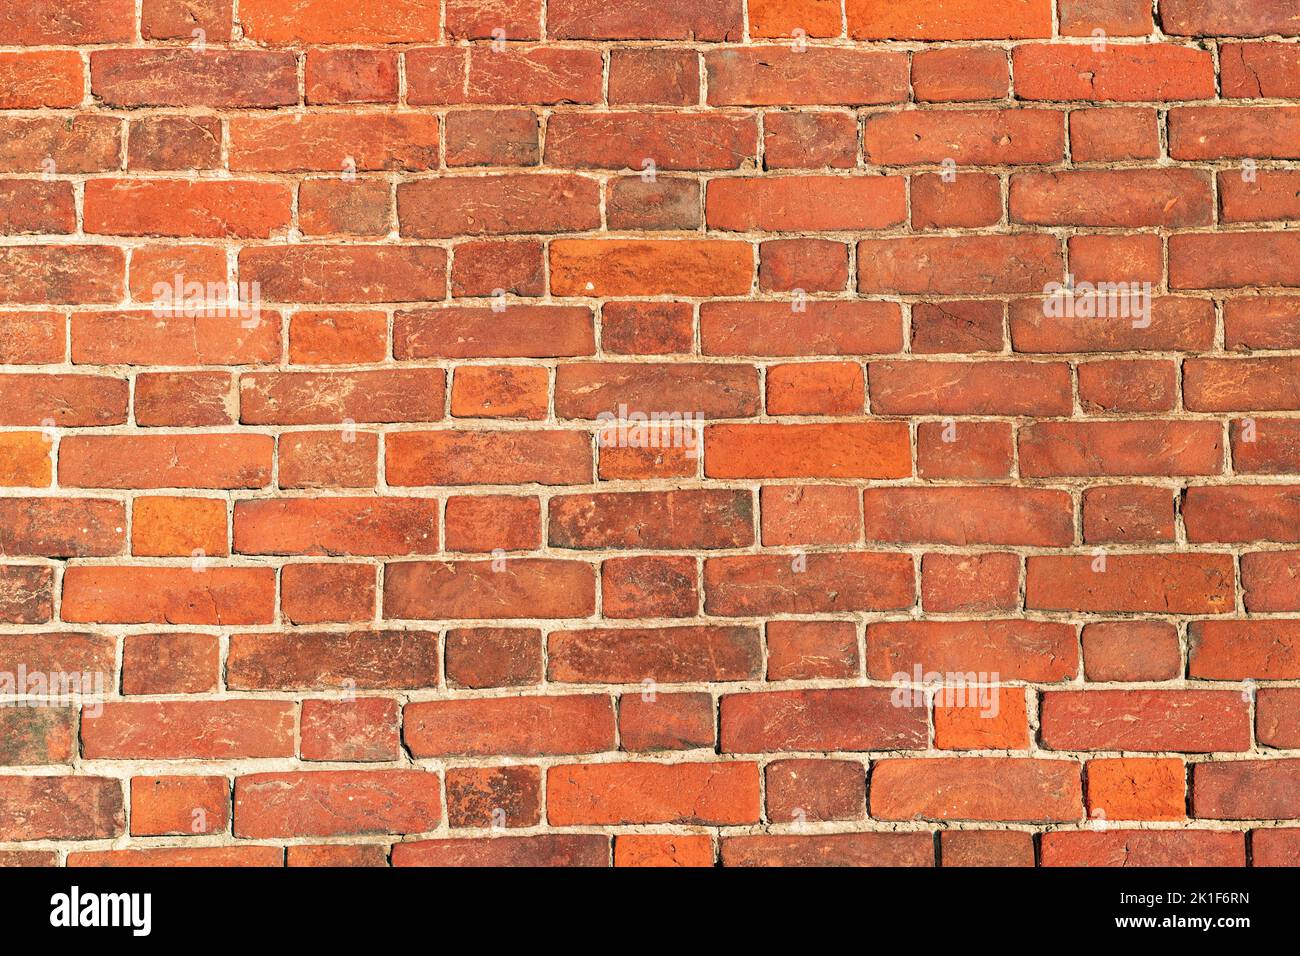 Section of red brick wall on a sunny day Stock Photo